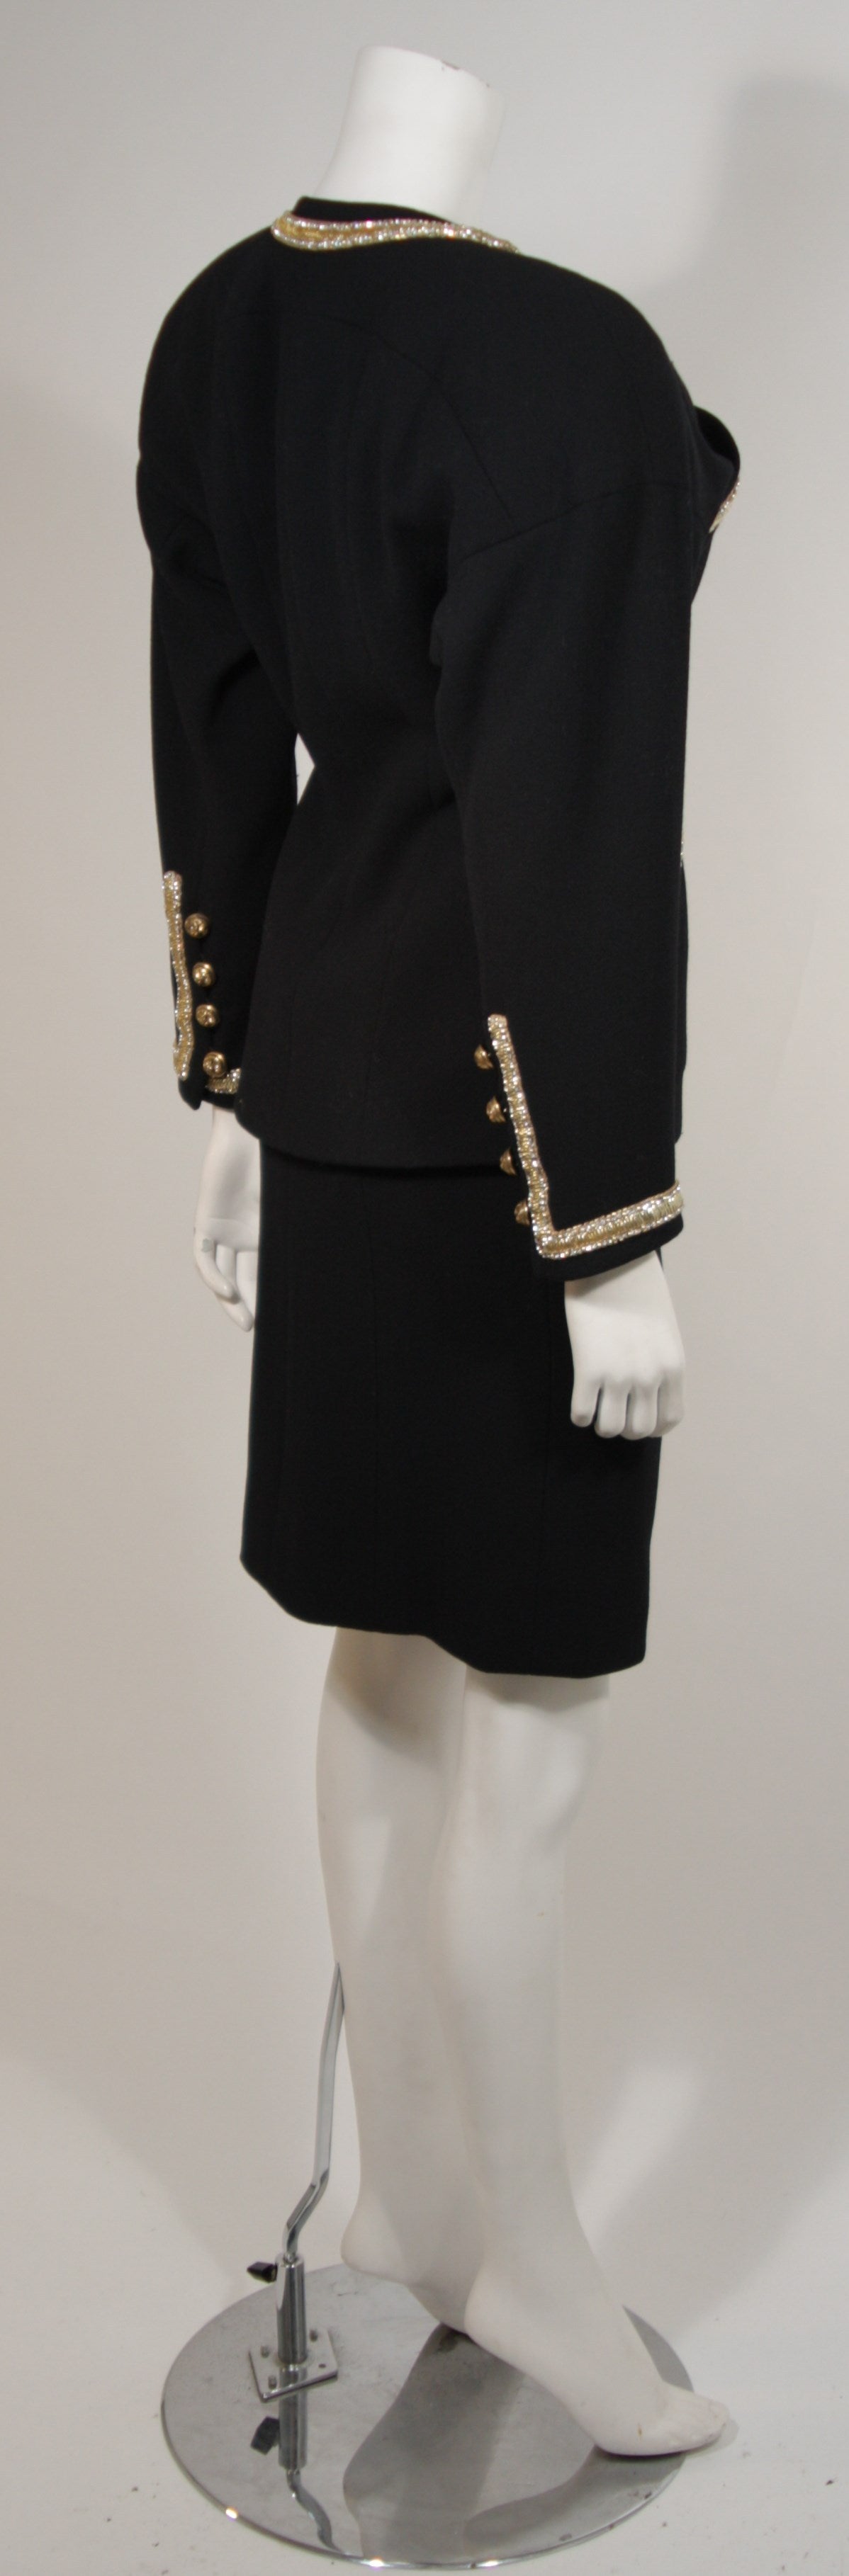 1980's Chanel Haute Couture Black Skirt Suit with Gold Embellished Trim Size 34 2